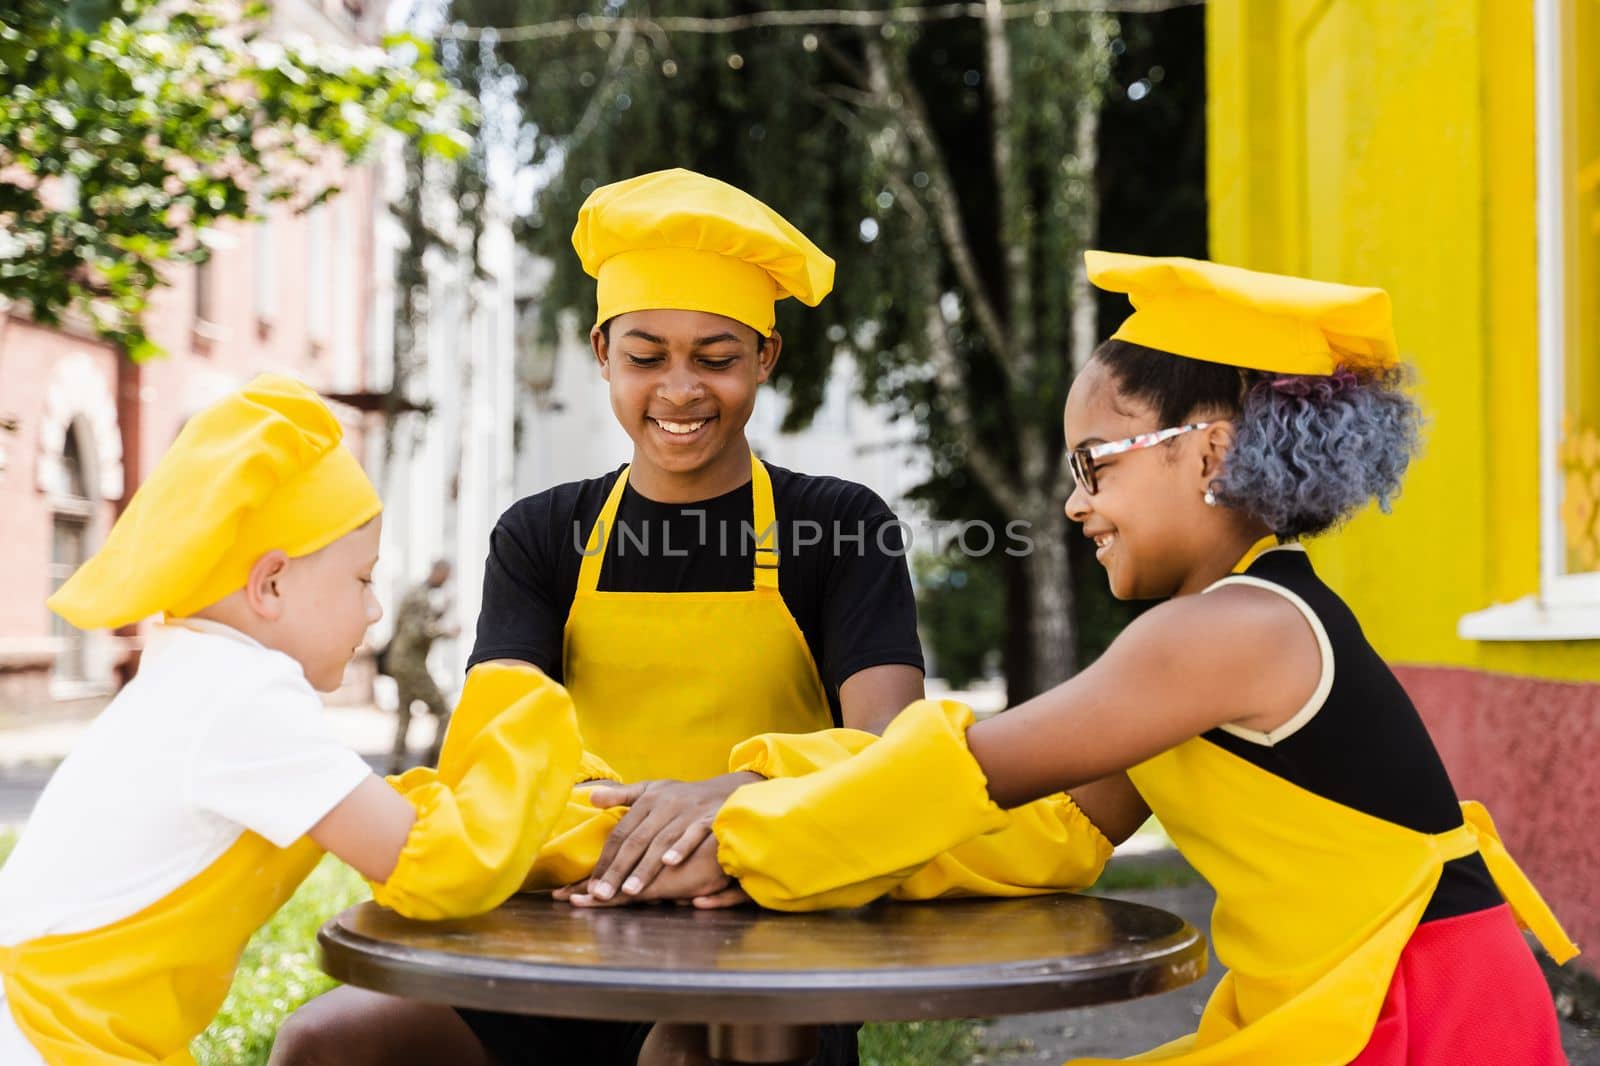 Teambuilding of multinational children cooks in chefs hat and yellow apron uniform put hands on each other, having fun and laughing. Multiethnic kids commutication activity